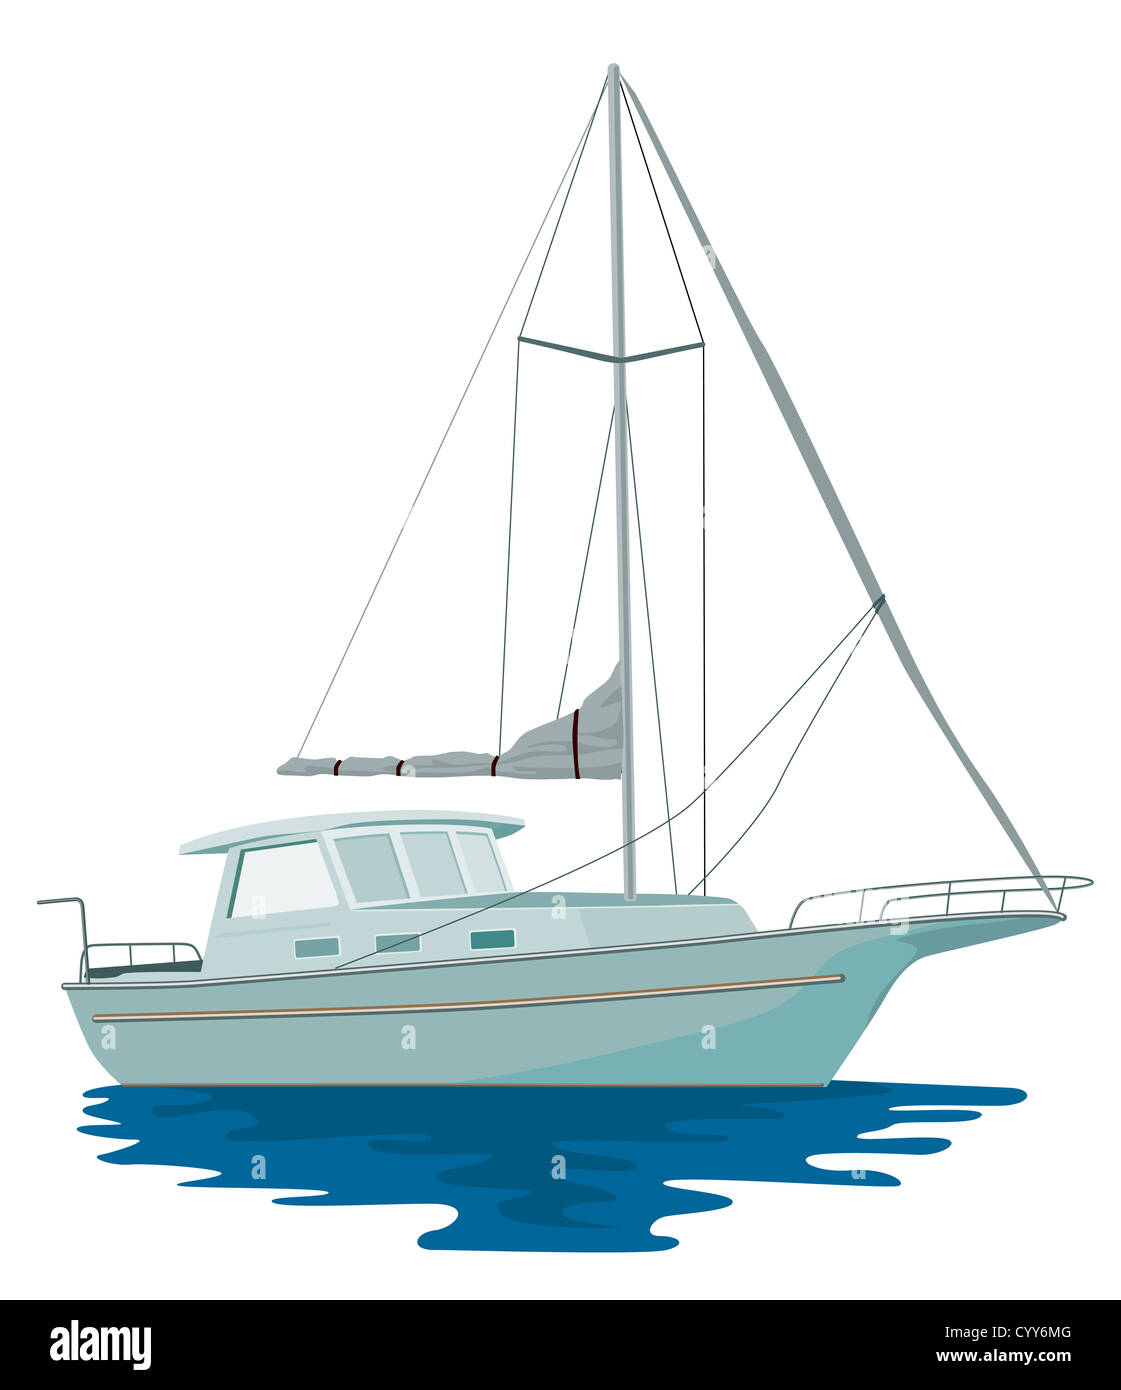 Illustration of a sailboat yacht done in retro style Stock Photo